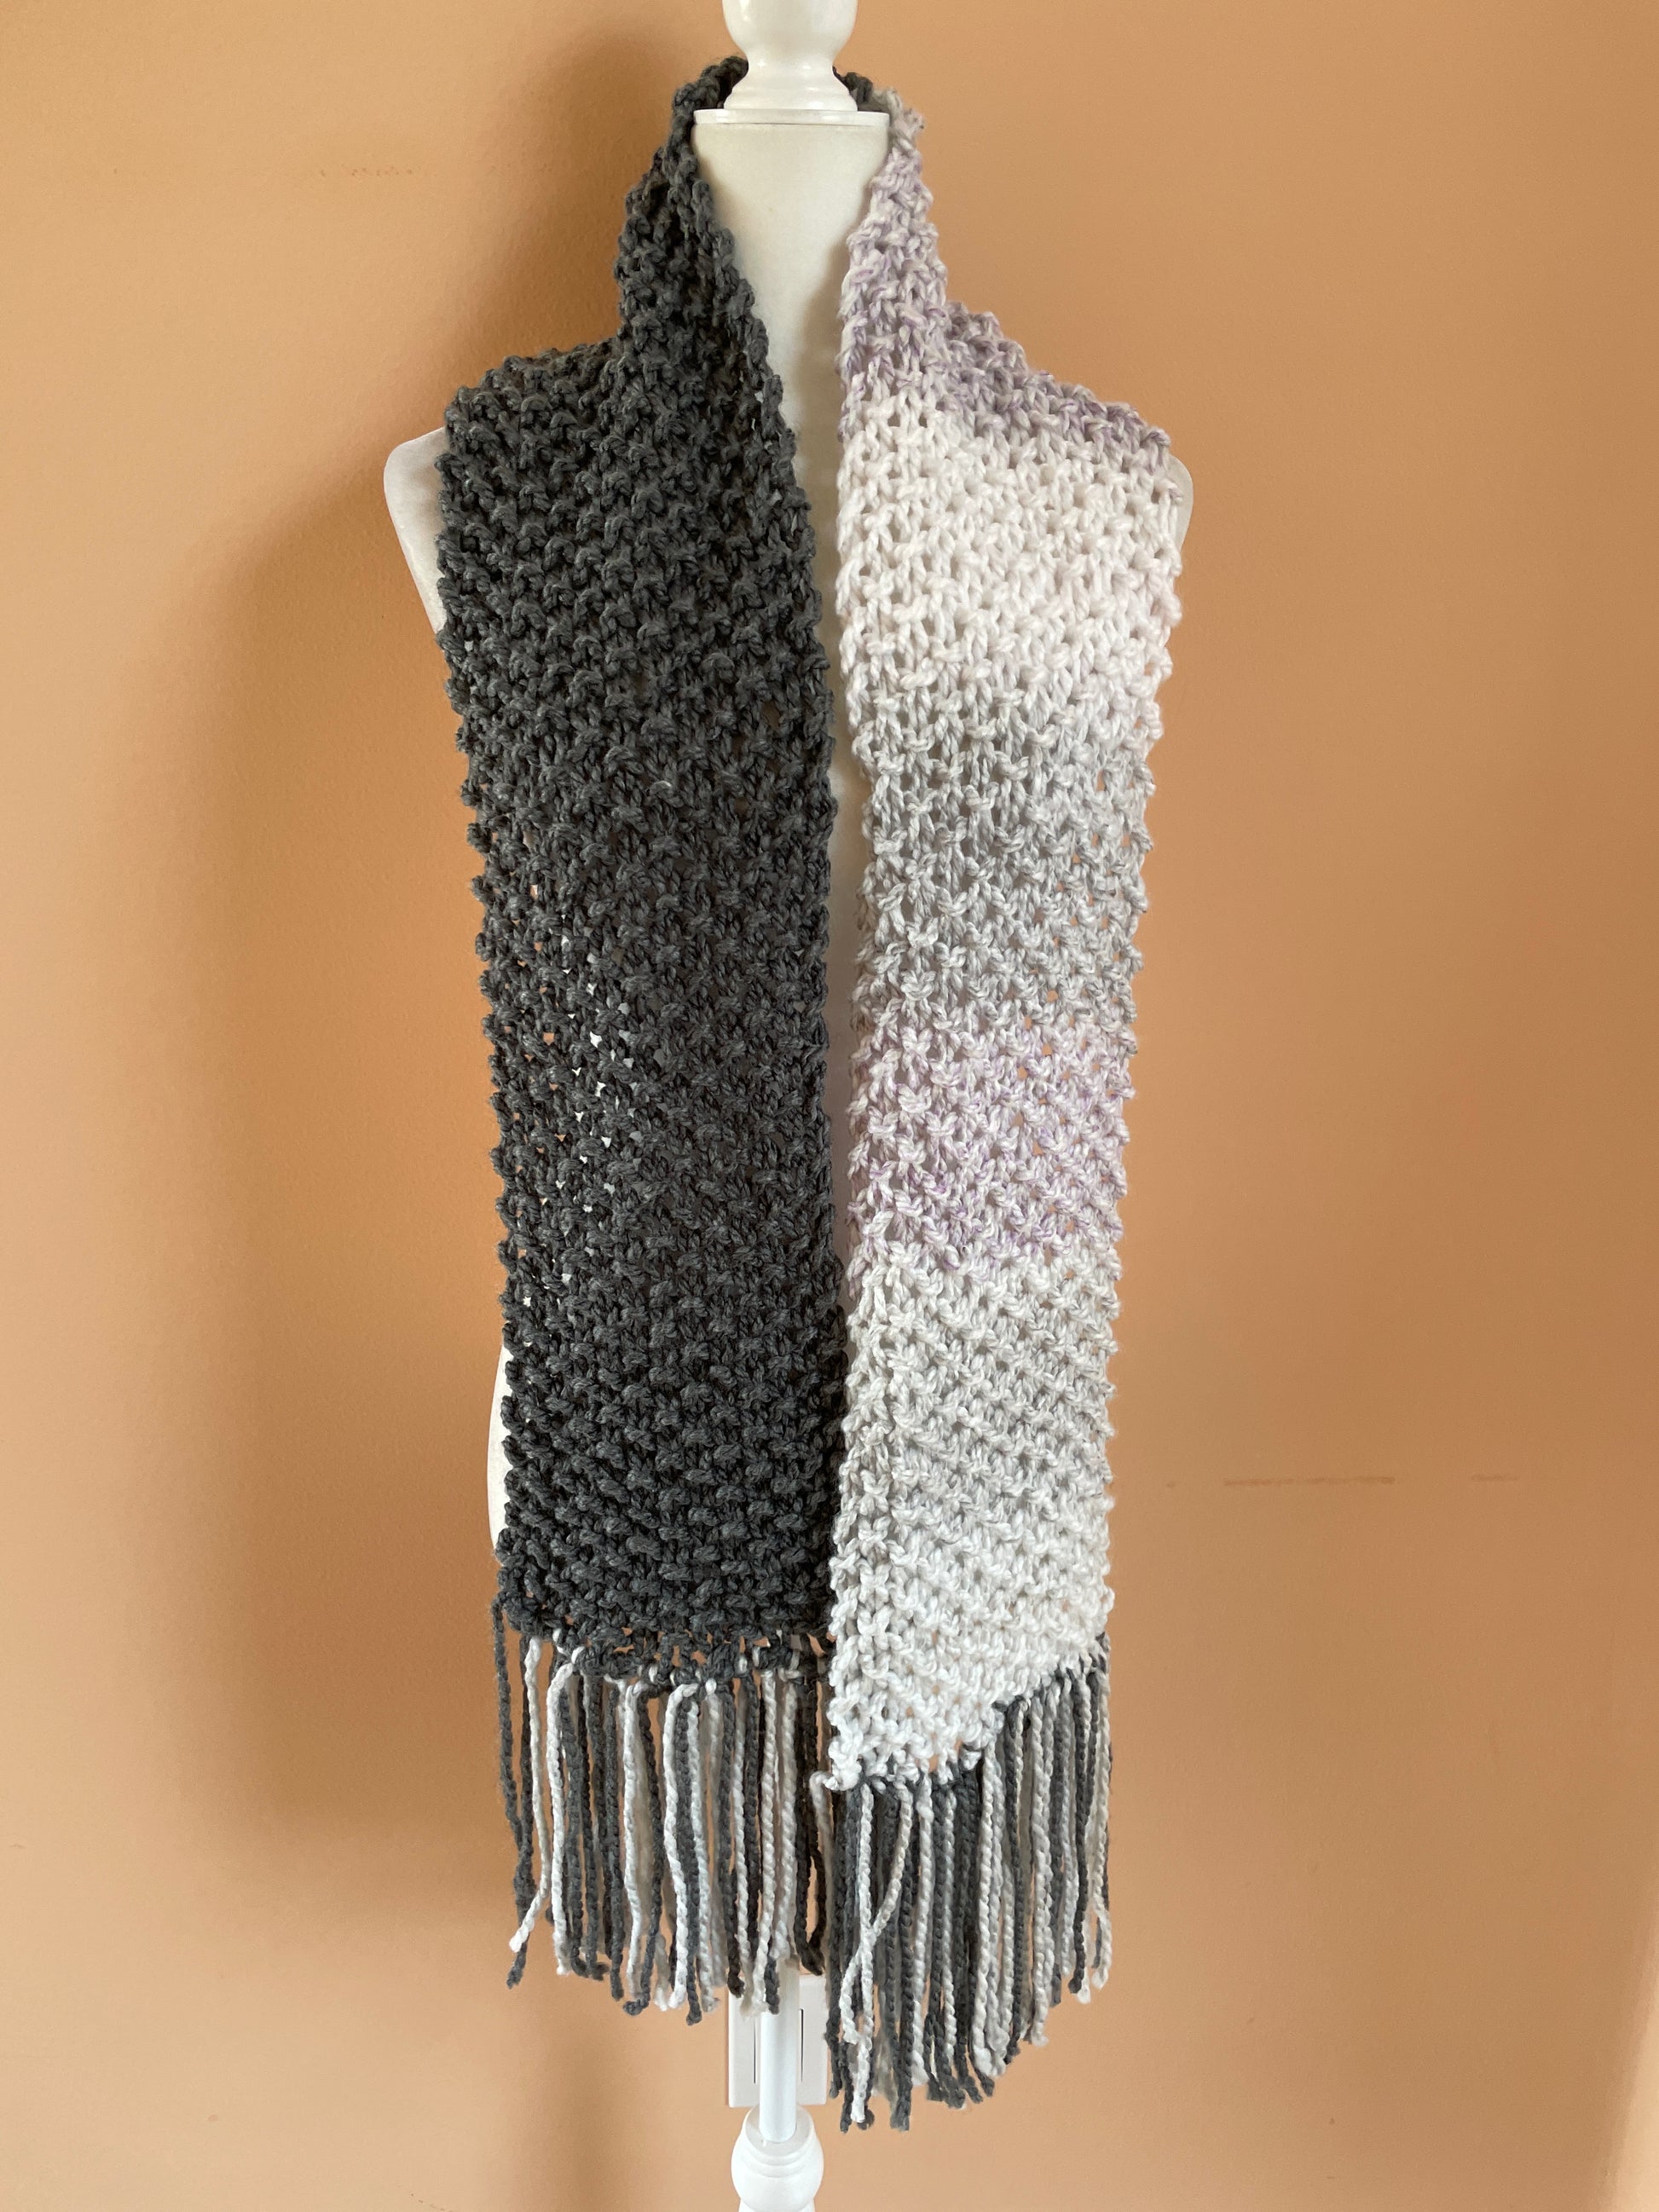  2000s Warm me Up Hand Knit Fringed Gray Winter Scarf